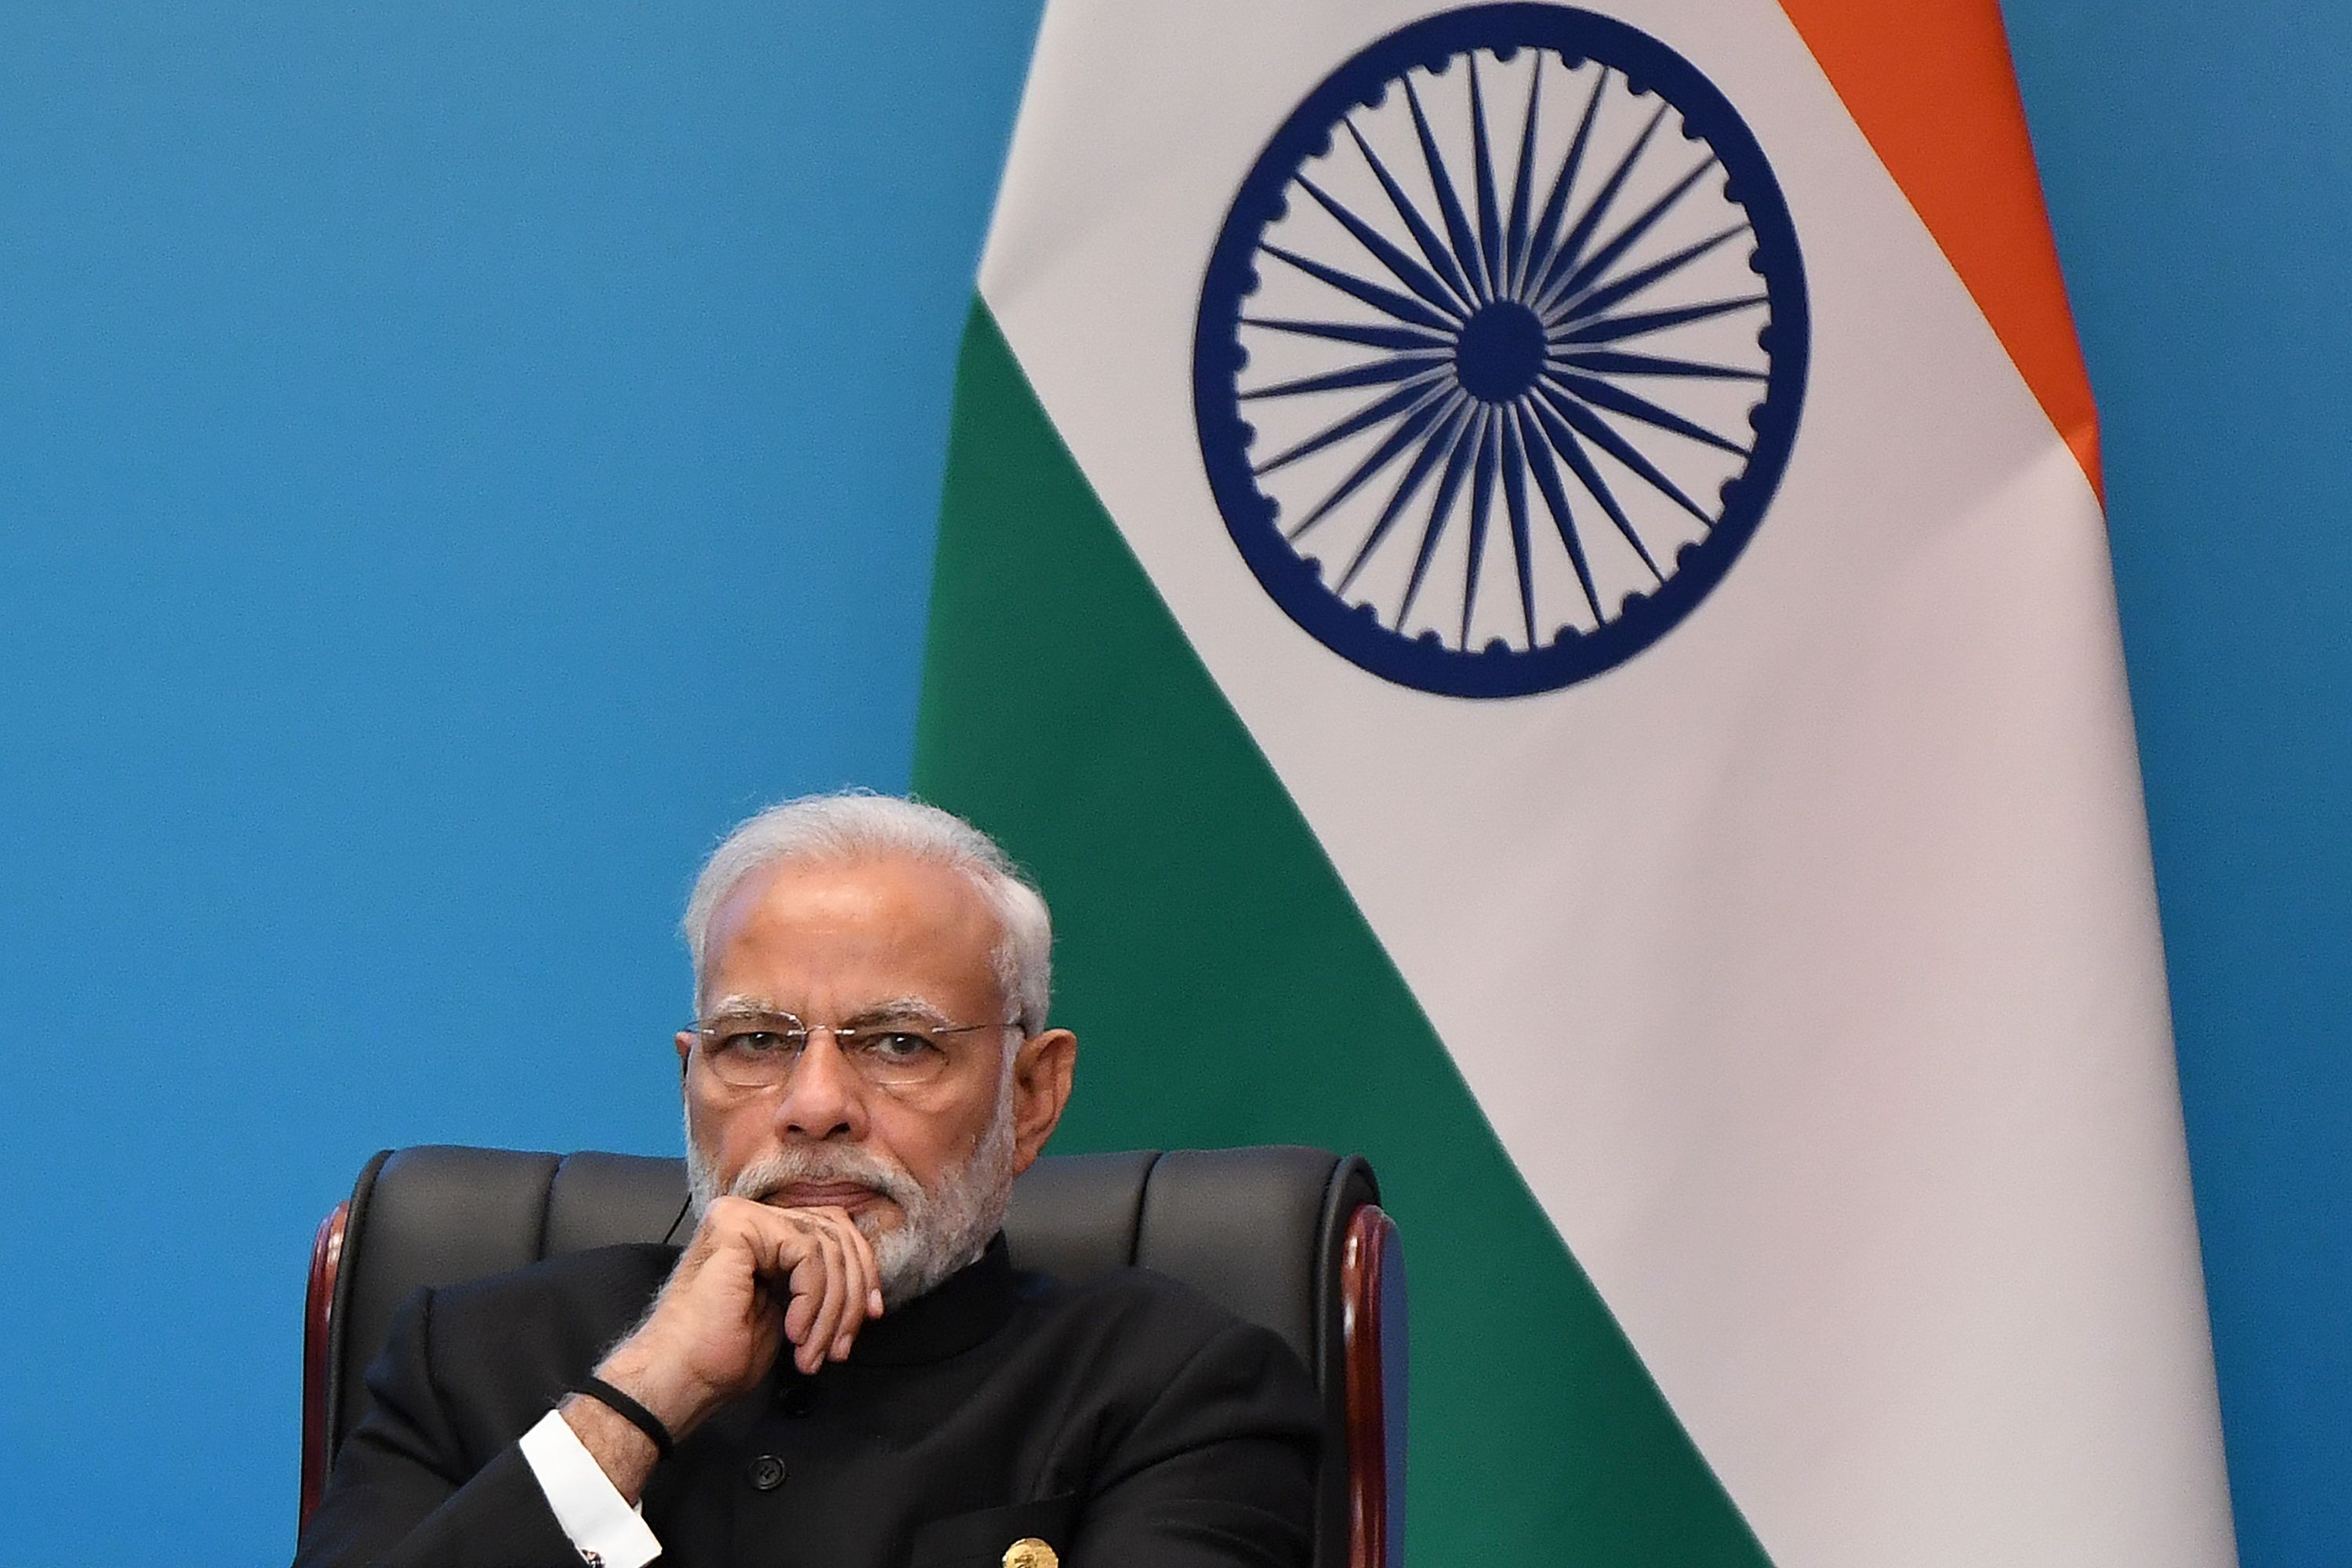 Indian Prime Minister Narendra Modi looks on as he attends a signing ceremony during the Shanghai Cooperation Organisation (SCO) Summit in Qingdao, China. His ruling government has come under fire for a crackdown on dissent following the arrest of key rights activists. Photo: AFP